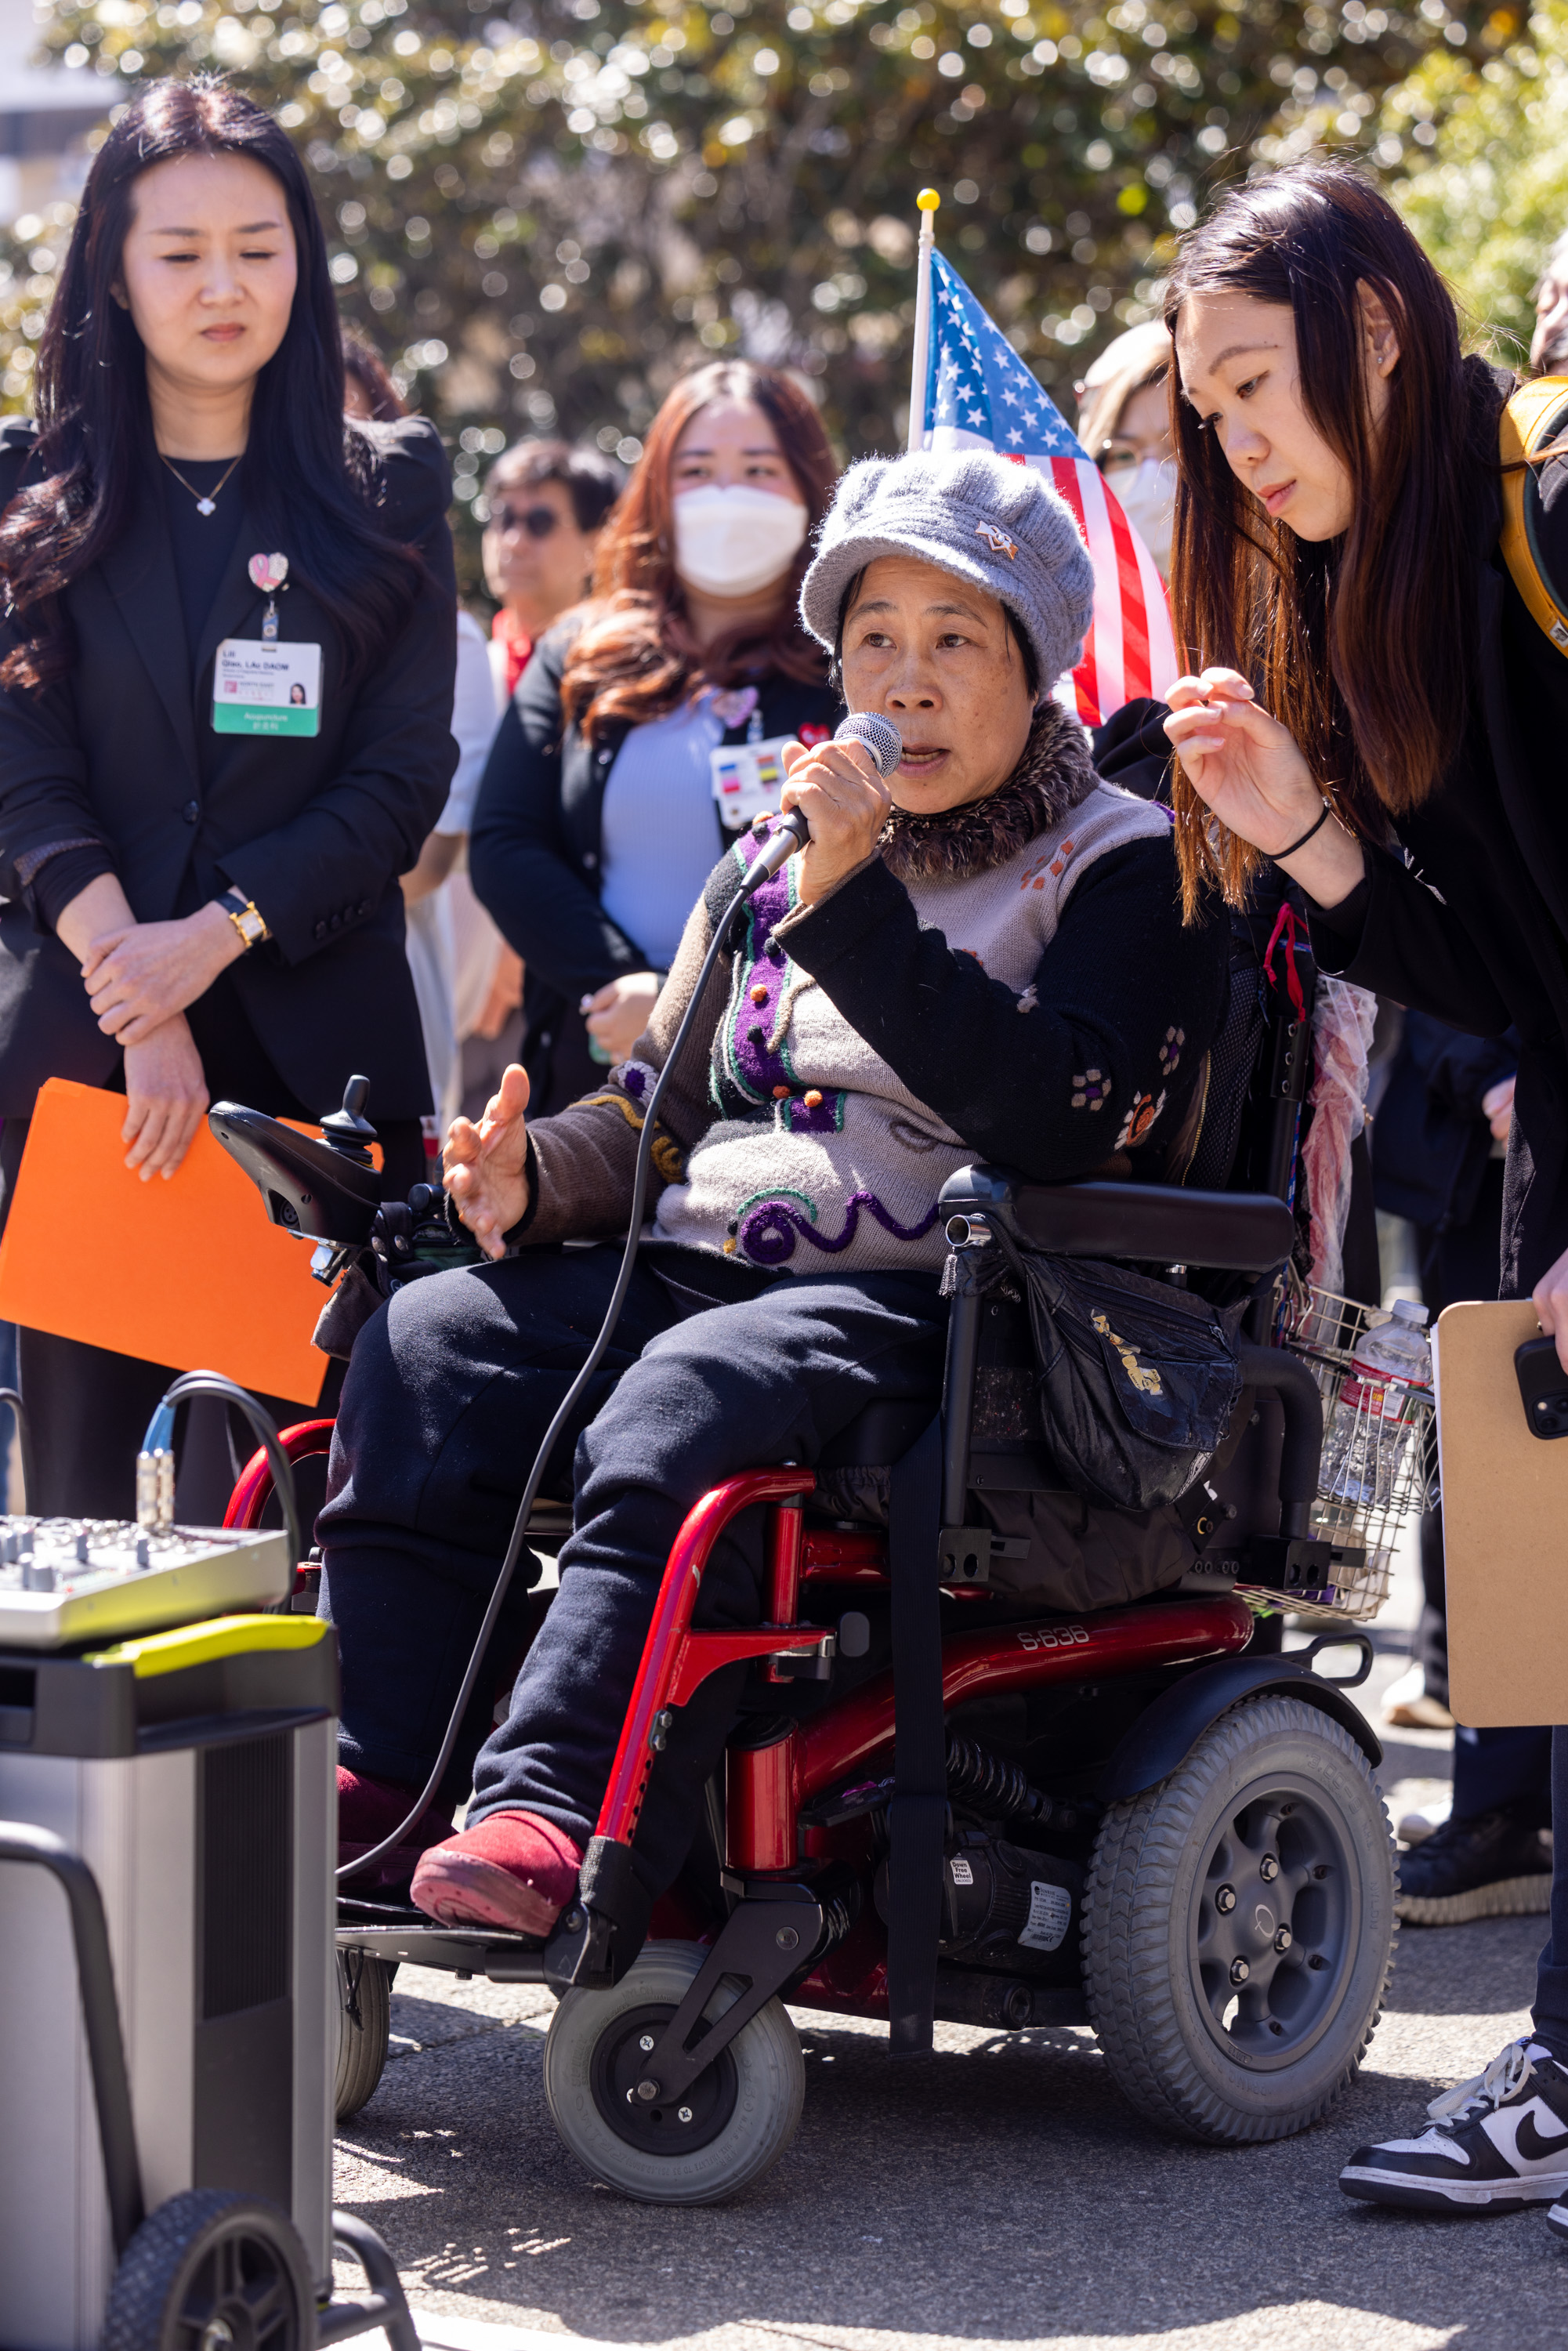 An elderly woman in a wheelchair speaks into a microphone, surrounded by women, one holding a clipboard. An American flag is attached to her chair.